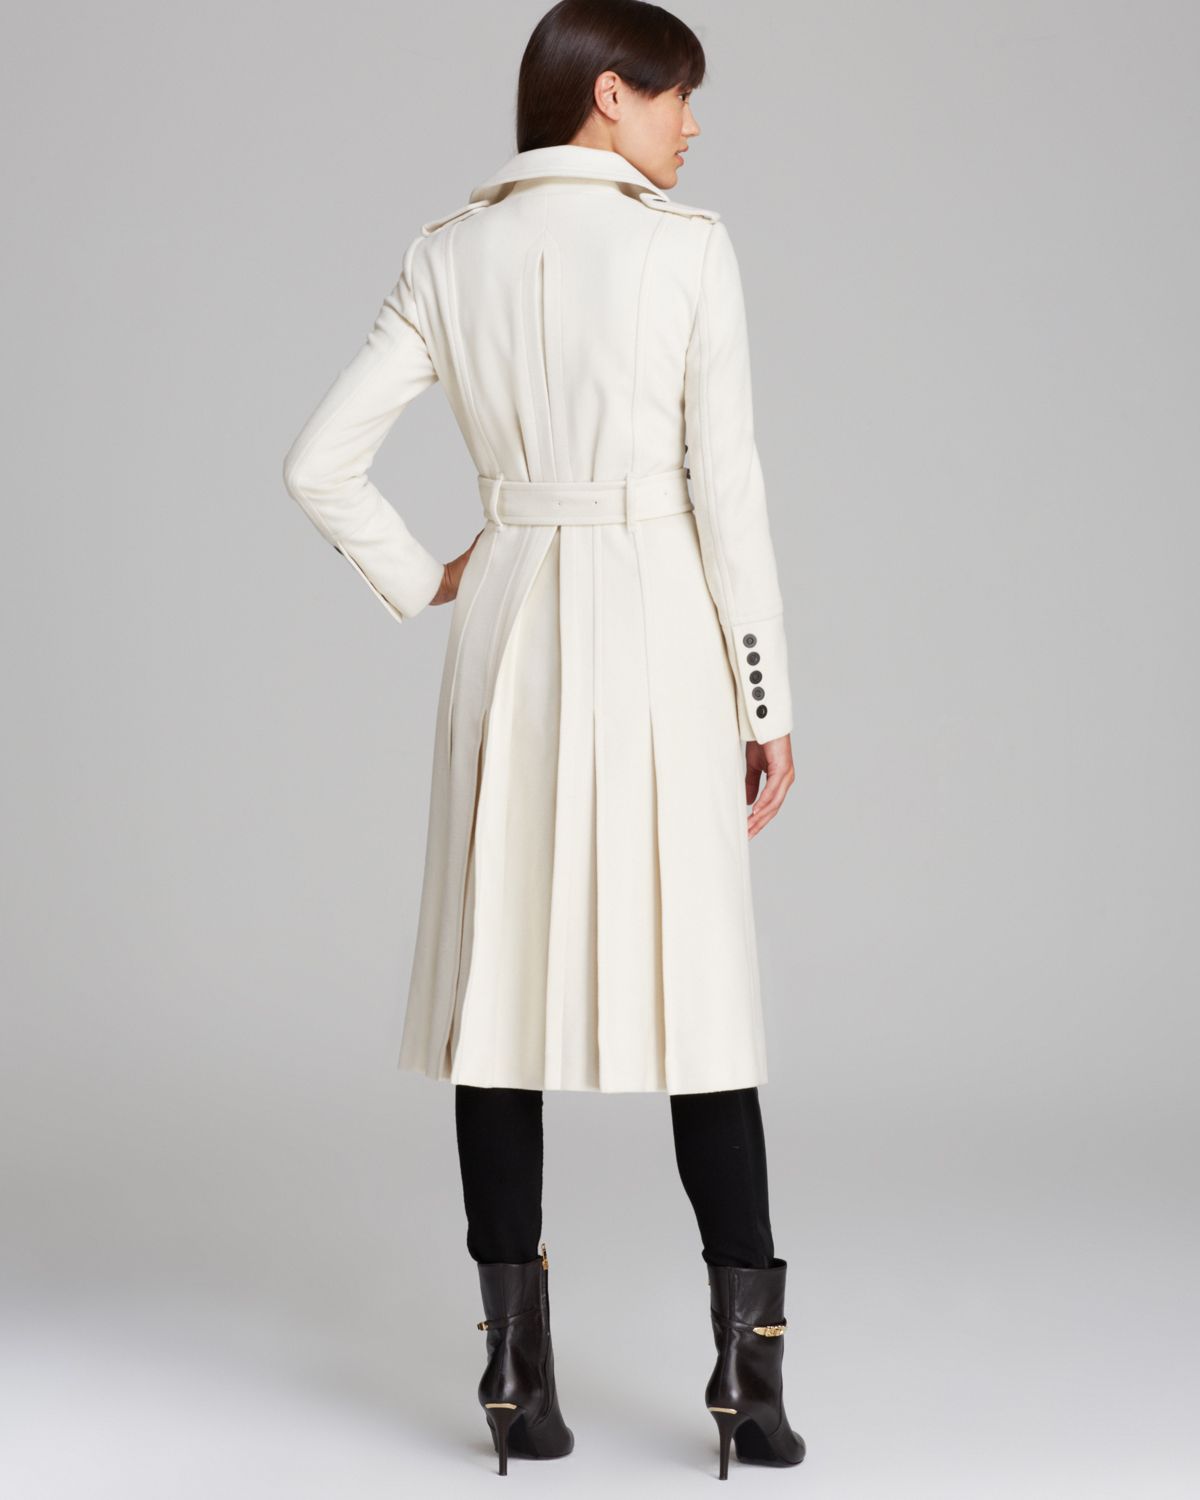 Lyst - Burberry Coat Military Wool Cashmere in White